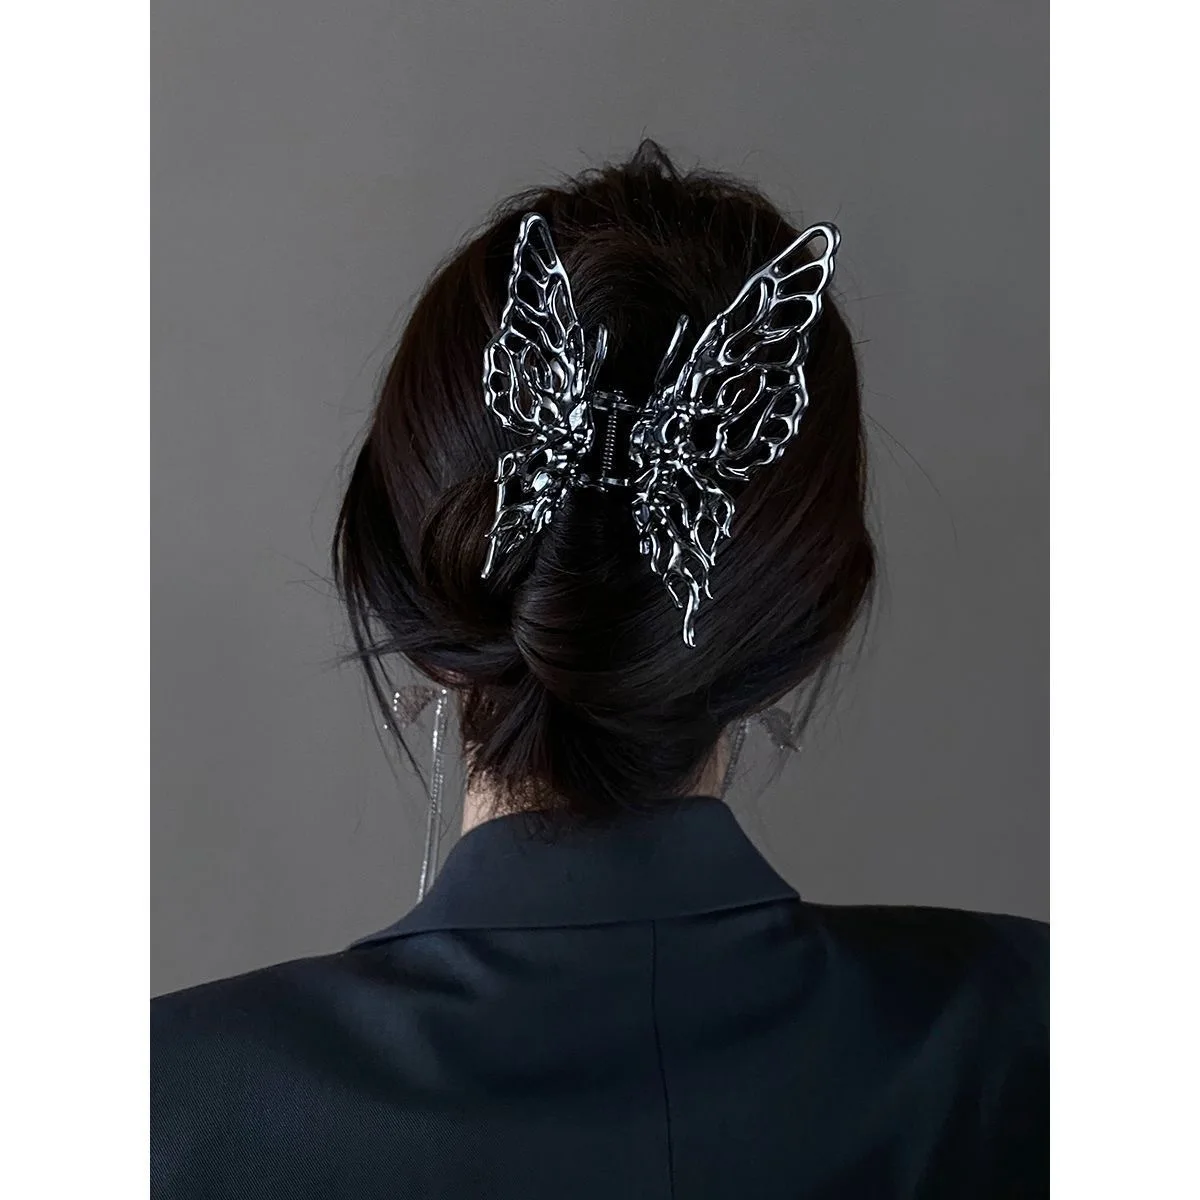 New Korea Bright Silver Cross Geometric Hairpin Butterfly Grab Clip Rose Flower Hair Claw Woman Girls Styling Barrette Headdress rose in glass 11ct stamped cross stitch 35 48cm